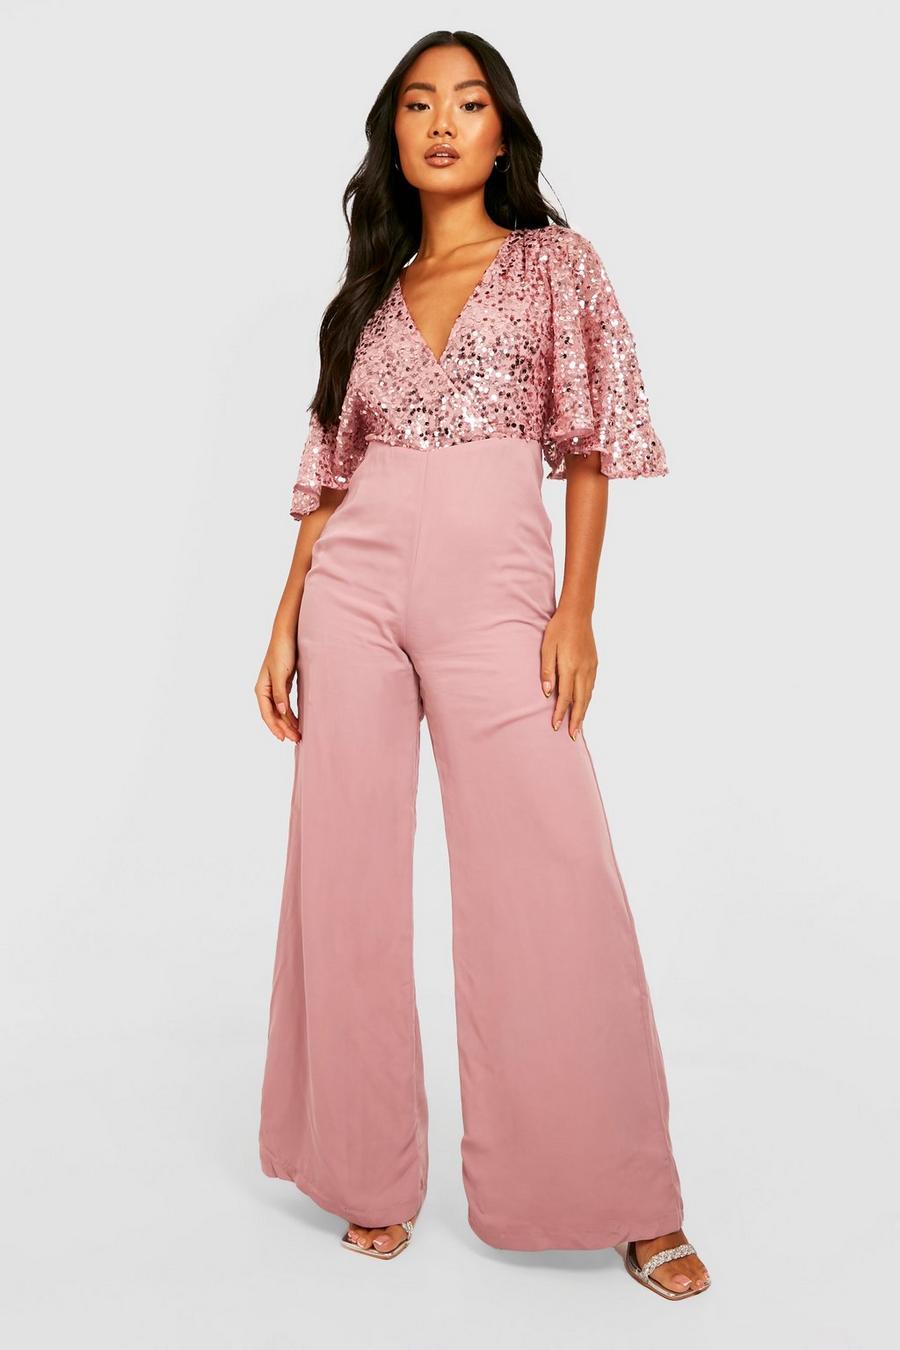 Dusty rose Petite Sequin Flared Sleeve Wide Leg Jumpsuit image number 1